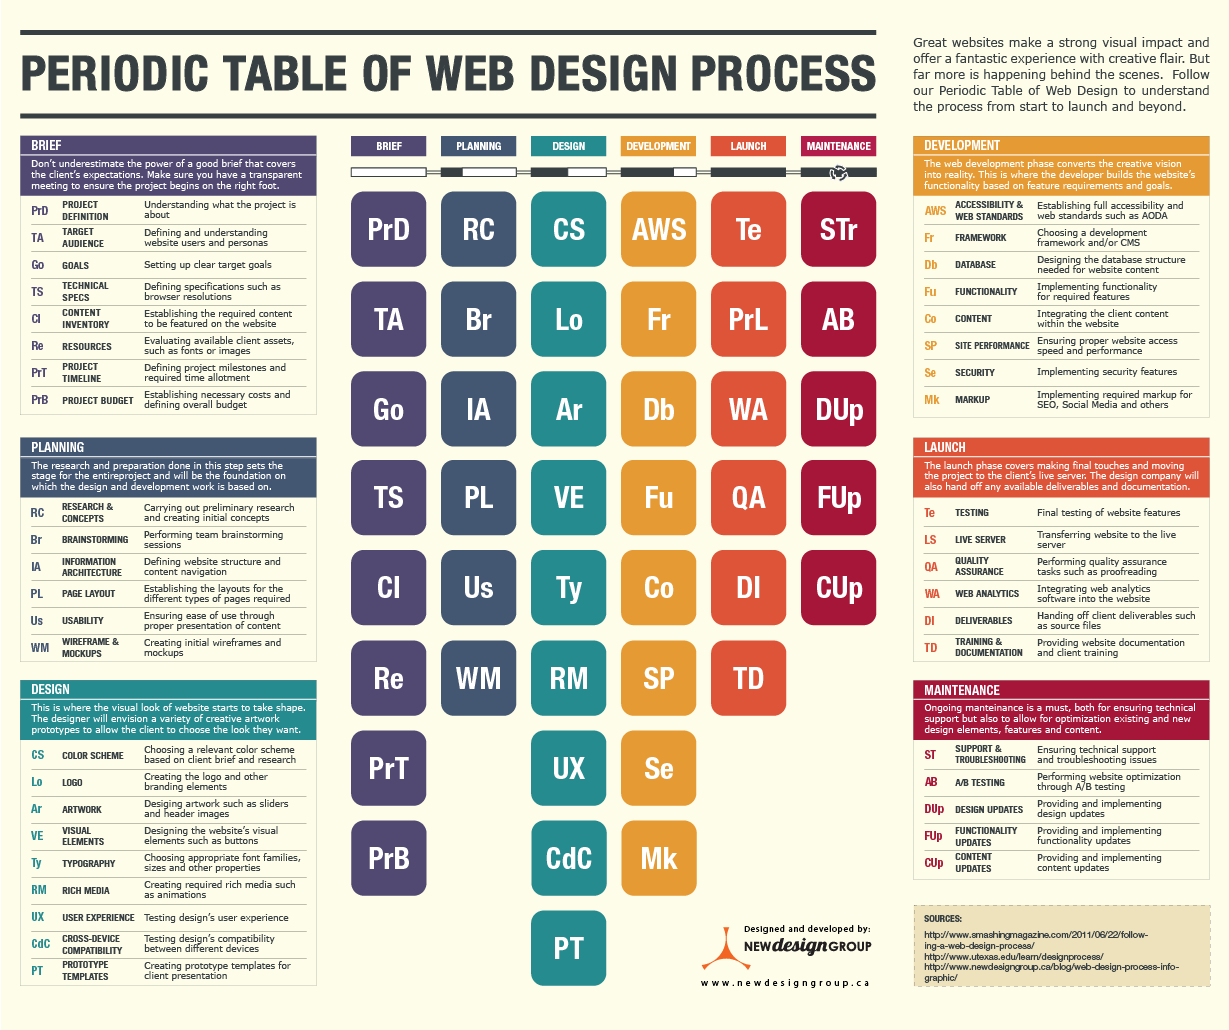 Web Design Process: Behind The Scenes [INFOGRAPHIC]